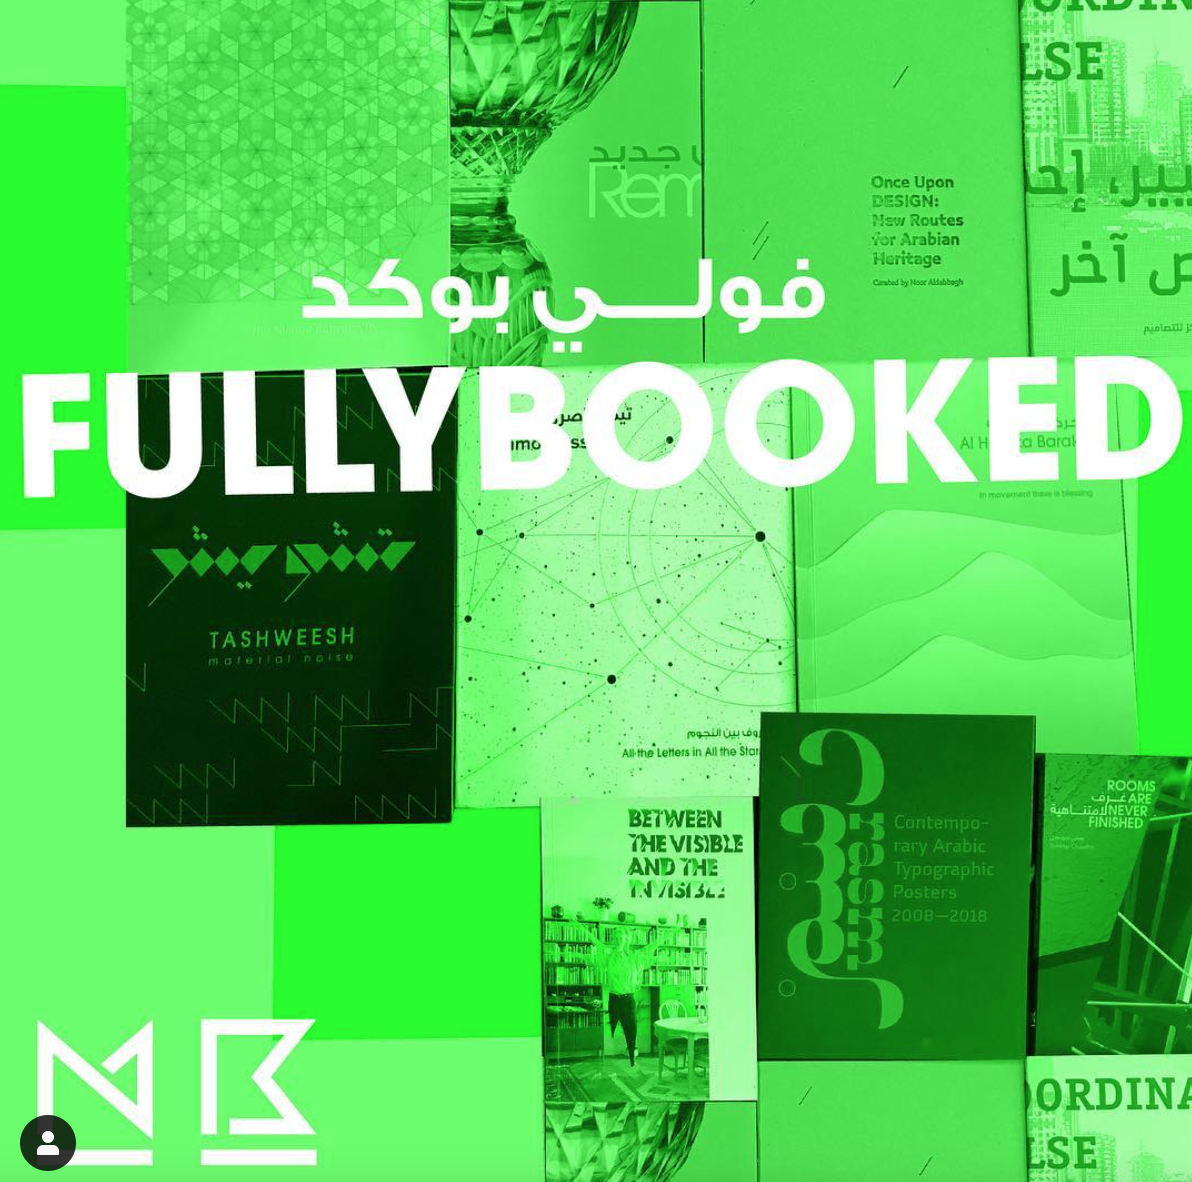  1971-Design Space are taking part in the third edition of Fully Booked which premieres during Art Week 2019.   launching the exhibition catalogue for  "GEO- Earth and its Materiality in the Ceramics of Michael Rice", the first institutional solo exh